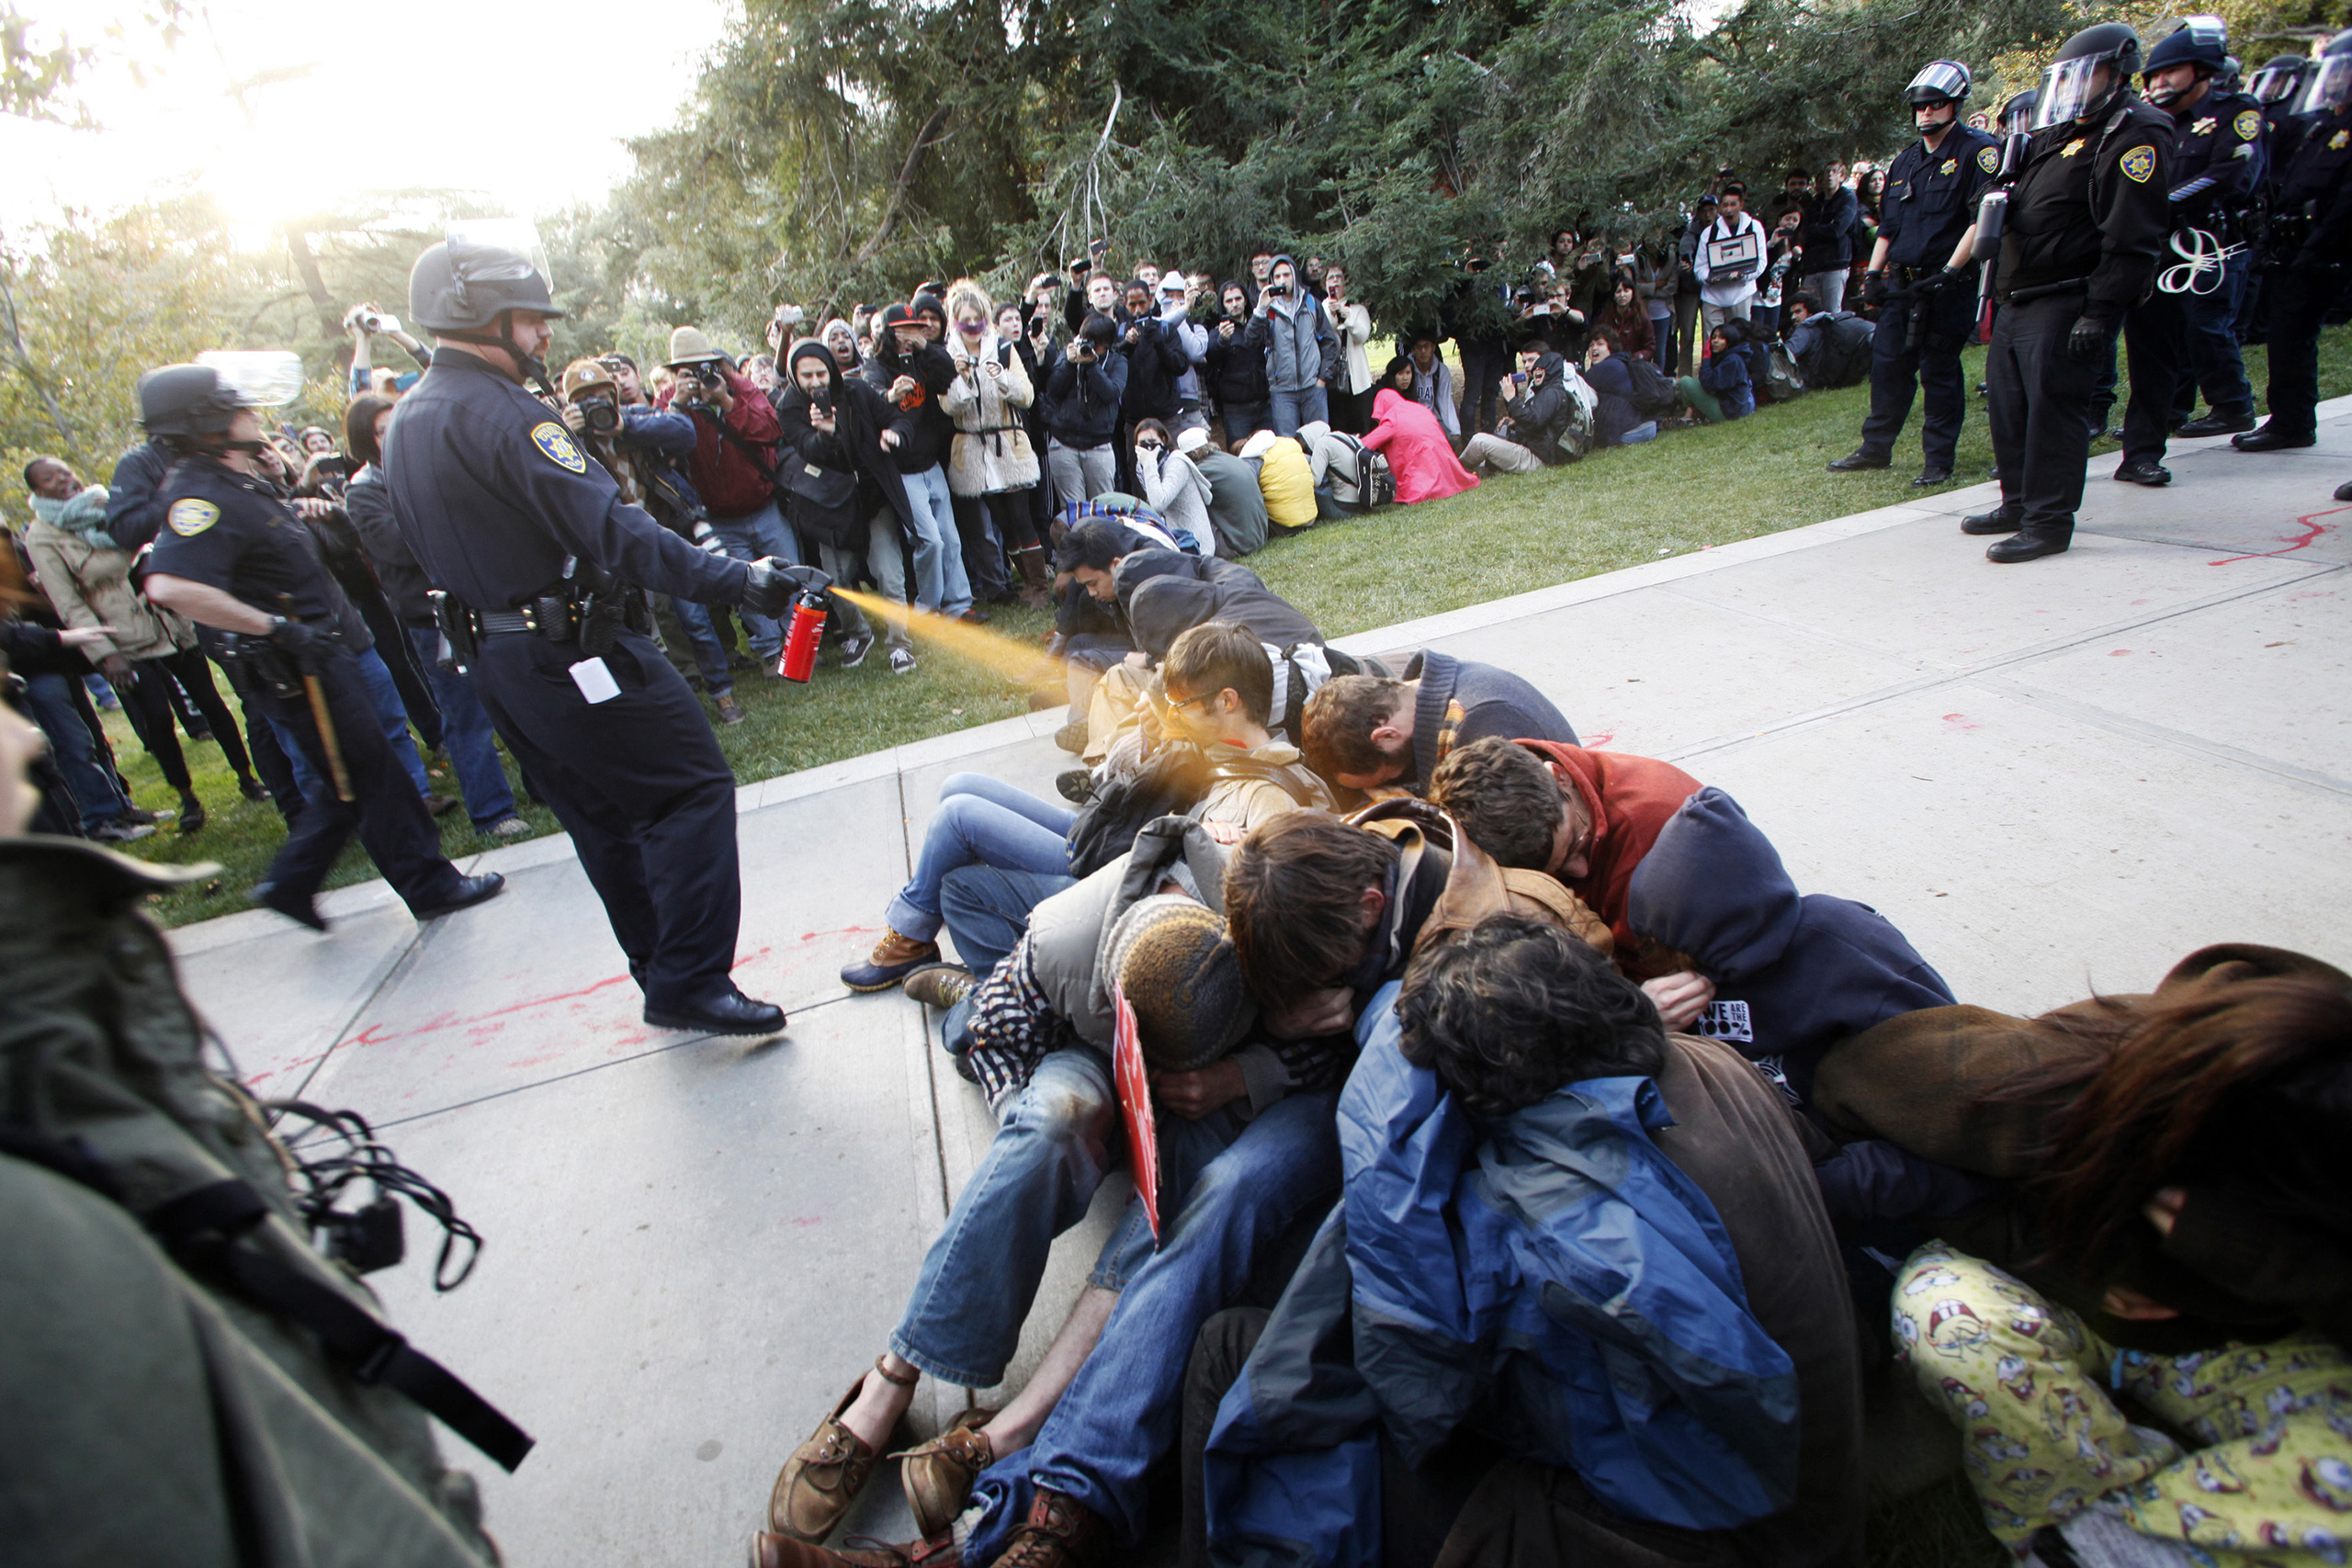 In this Nov. 18, 2011, file photo, University of California, Davis Police Lt. John Pike uses pepper spray to move Occupy UC Davis protesters while blocking their exit from the school's quad in Davis, Calif. The school reportedly paid image consultants at least $175,000 to try to clean up the online image of the university after the incident. (Wayne Tilcock—The Enterprise/AP)